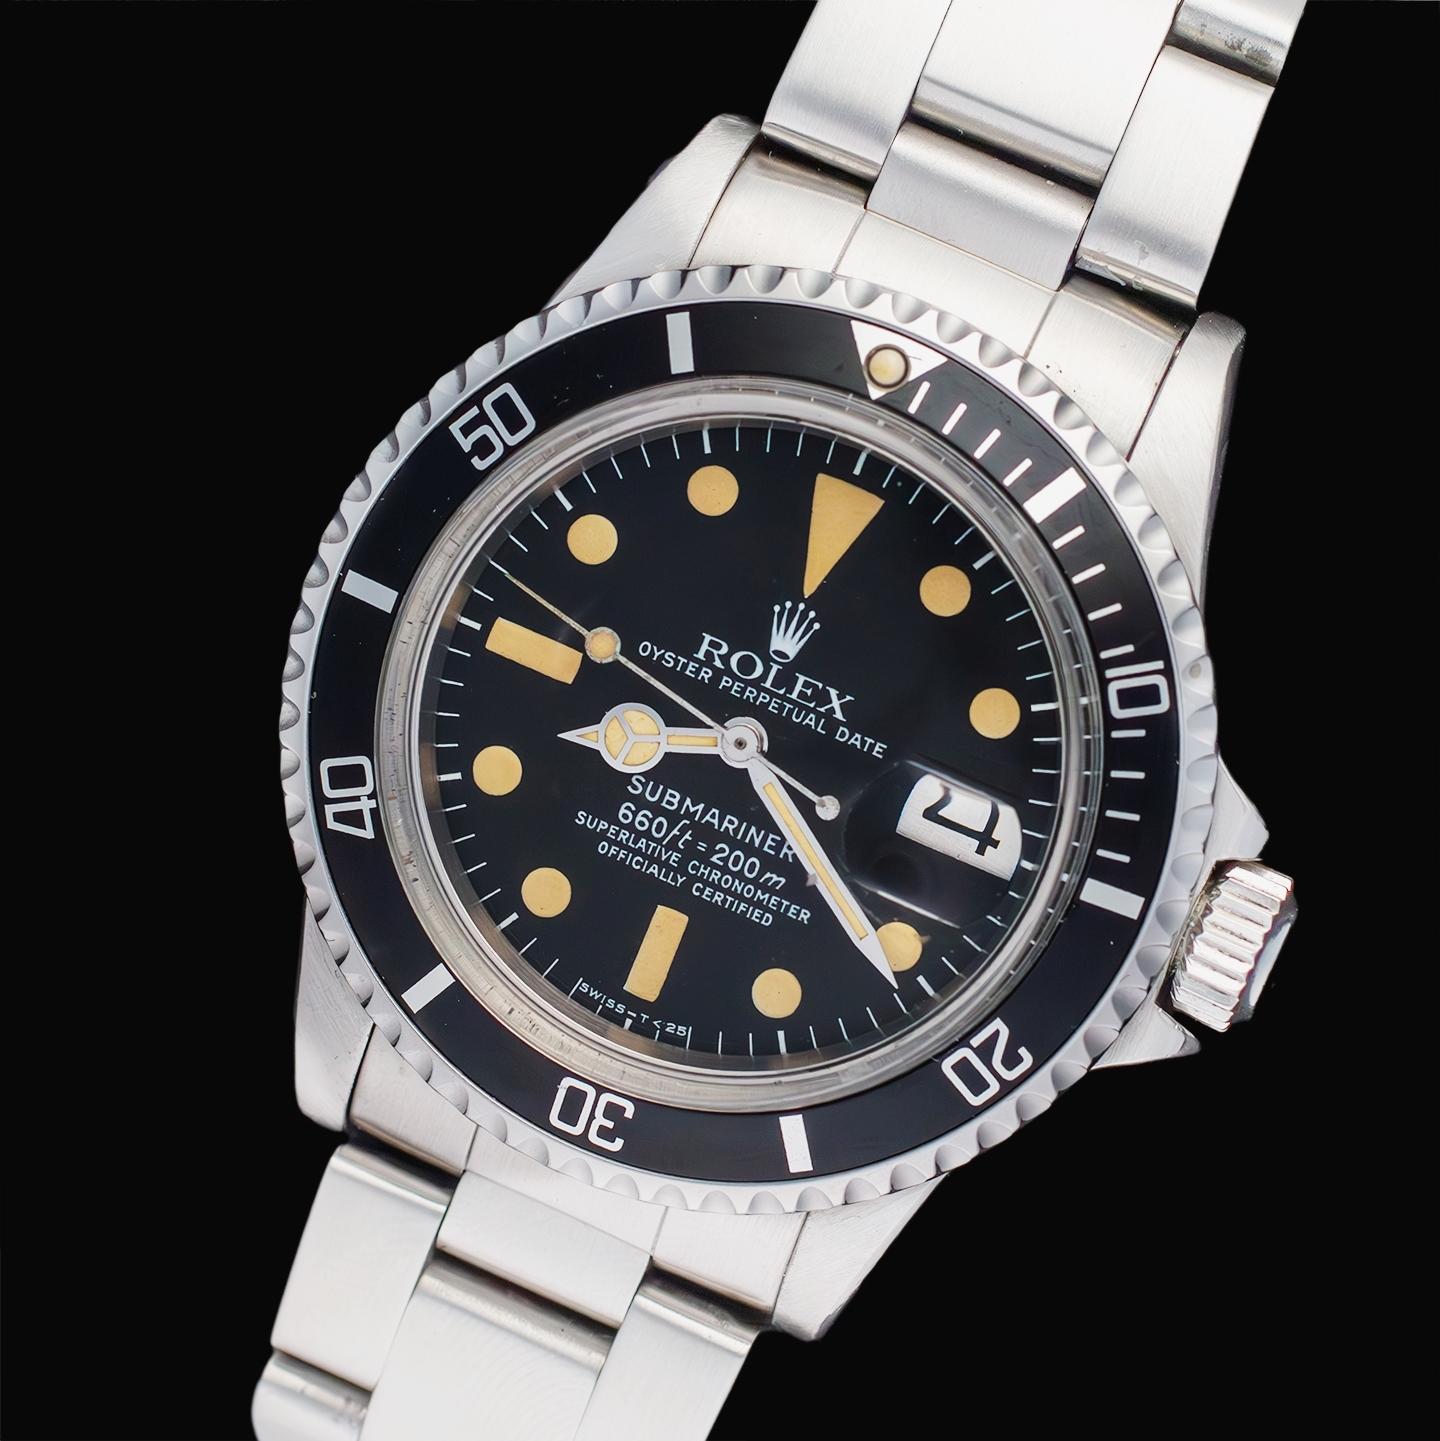 Brand: Vintage Rolex
Model: 1680
Year: 1974
Serial number: 42xxxxx
Reference: C03600; C03371

Case: Show sign of wear with some polish from previous; inner case back stamped 1680

Dial: Excellent Condition Tritium Dial where the lumes have turned